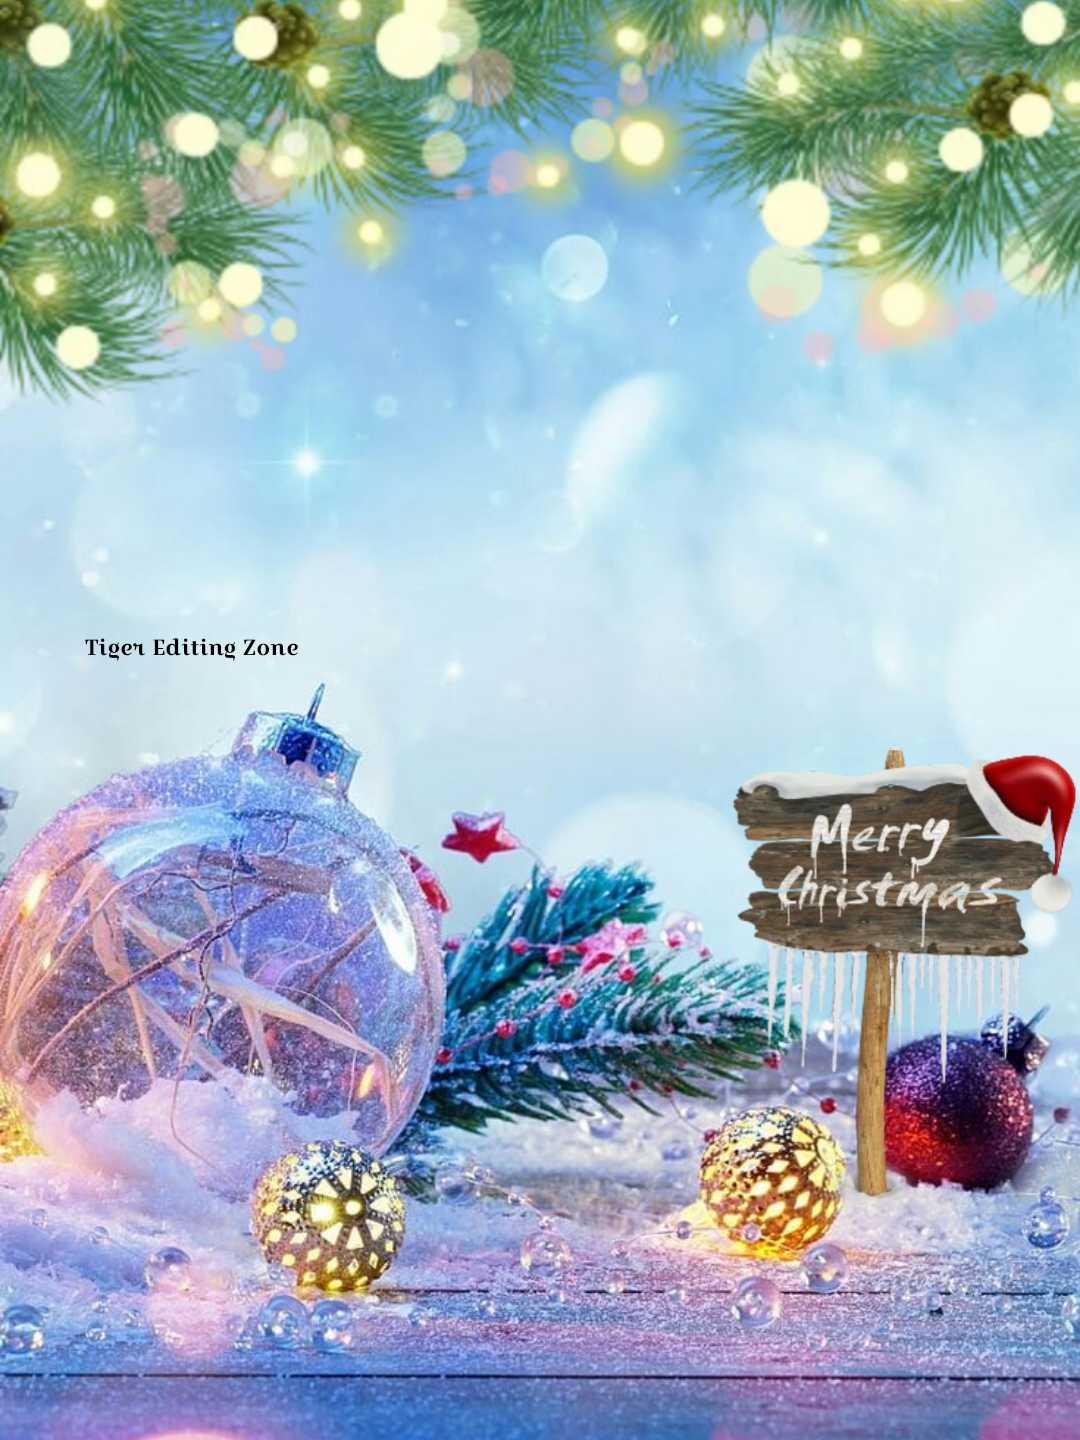 If you are looking for Christmas banner editing PNG then I have given Santa Claus Merry Christmas background Banner images for editing